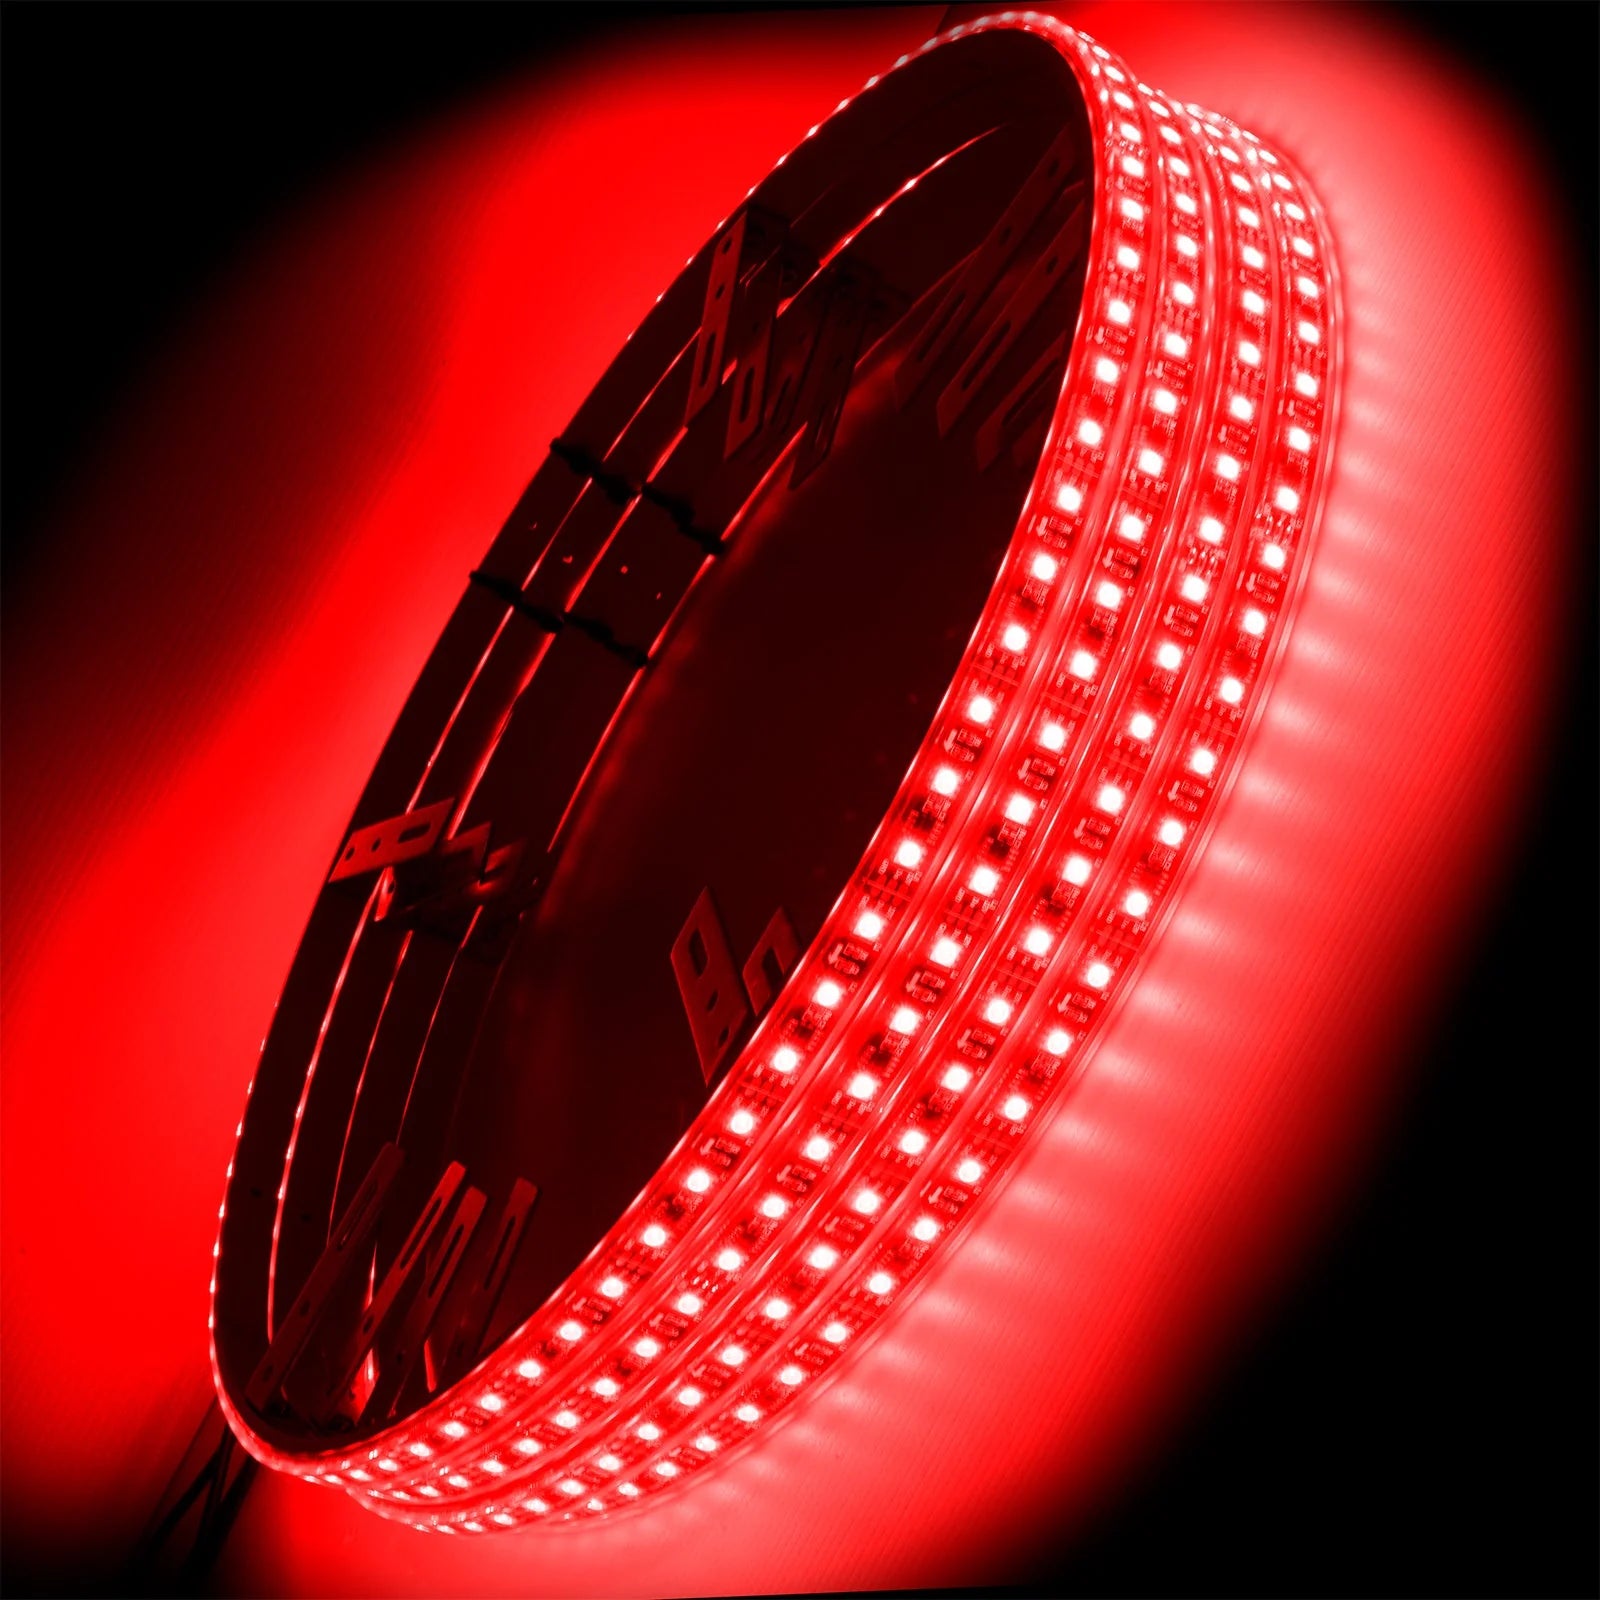 Oracle Double LED Illuminated Wheel Rings, Double Row - Red